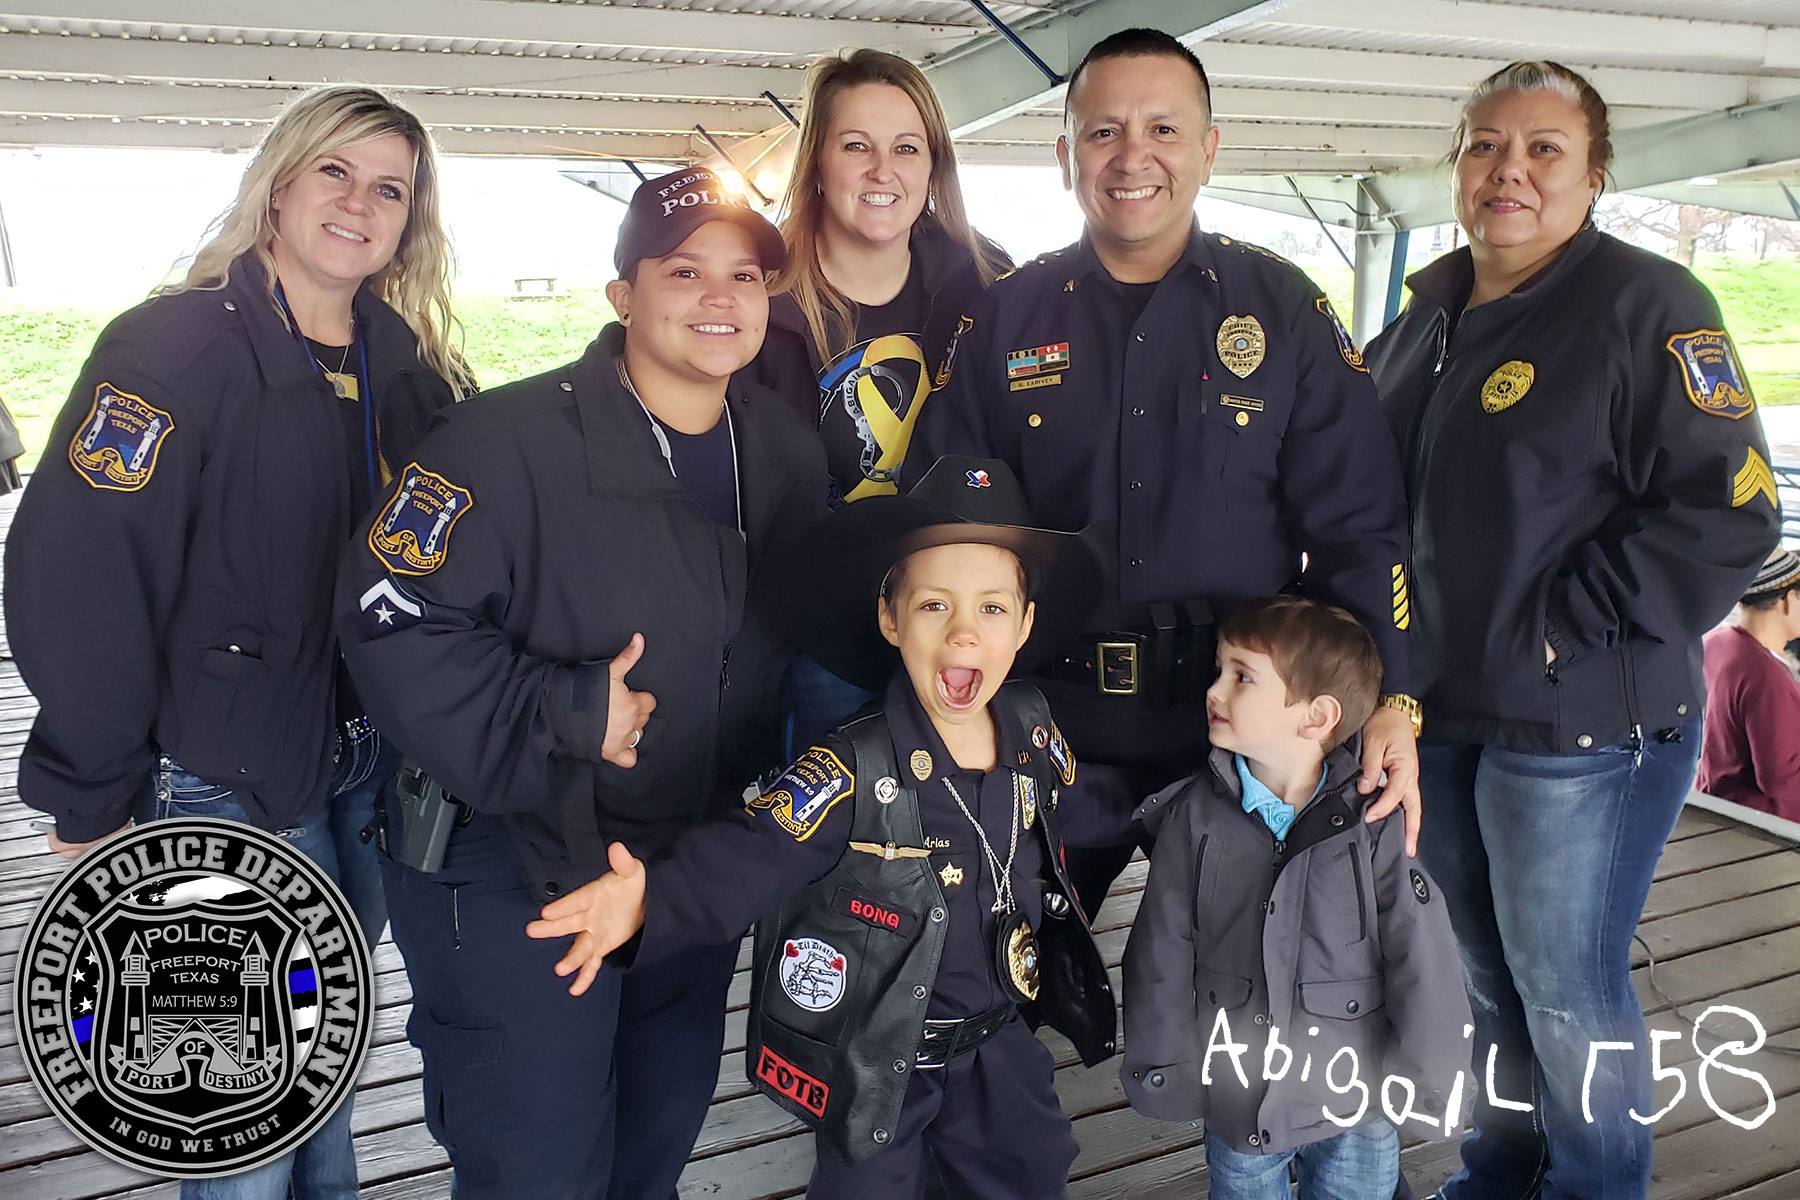 Officer Abigail' meets Astros' Jose Altuve ahead of first game of